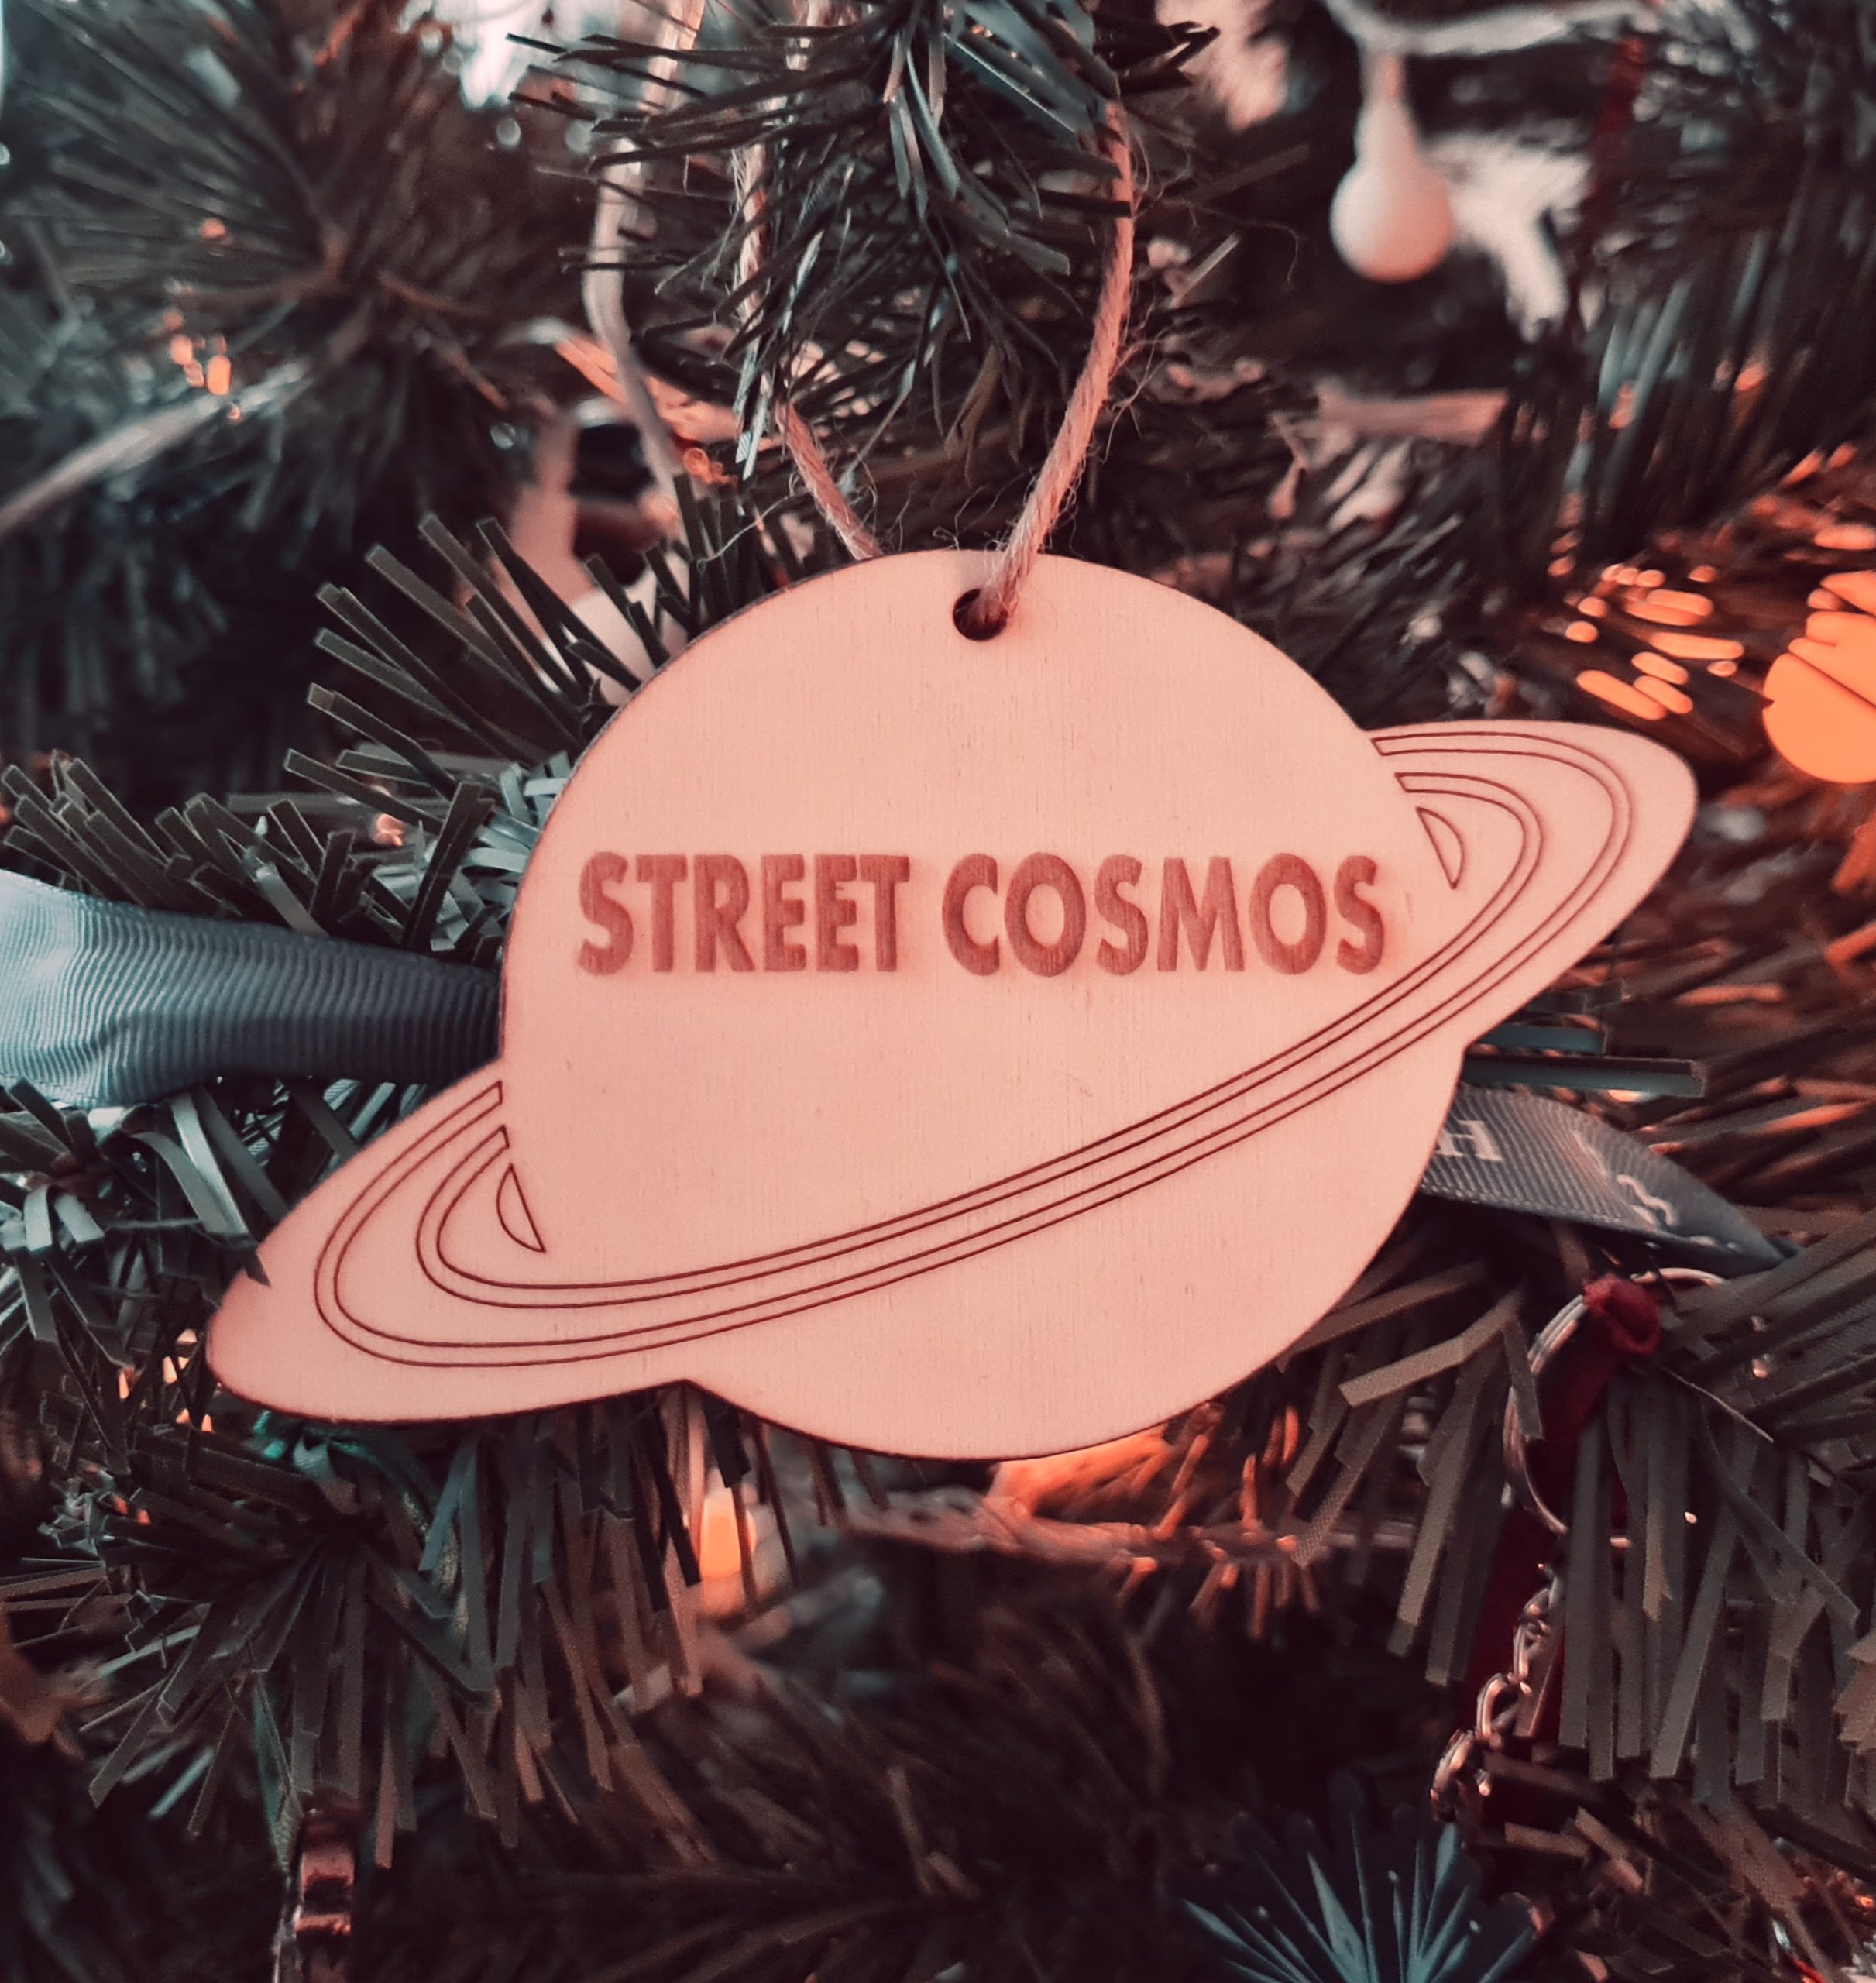 Merry Christmas and Happy New Year from Street Cosmos!! featured image.